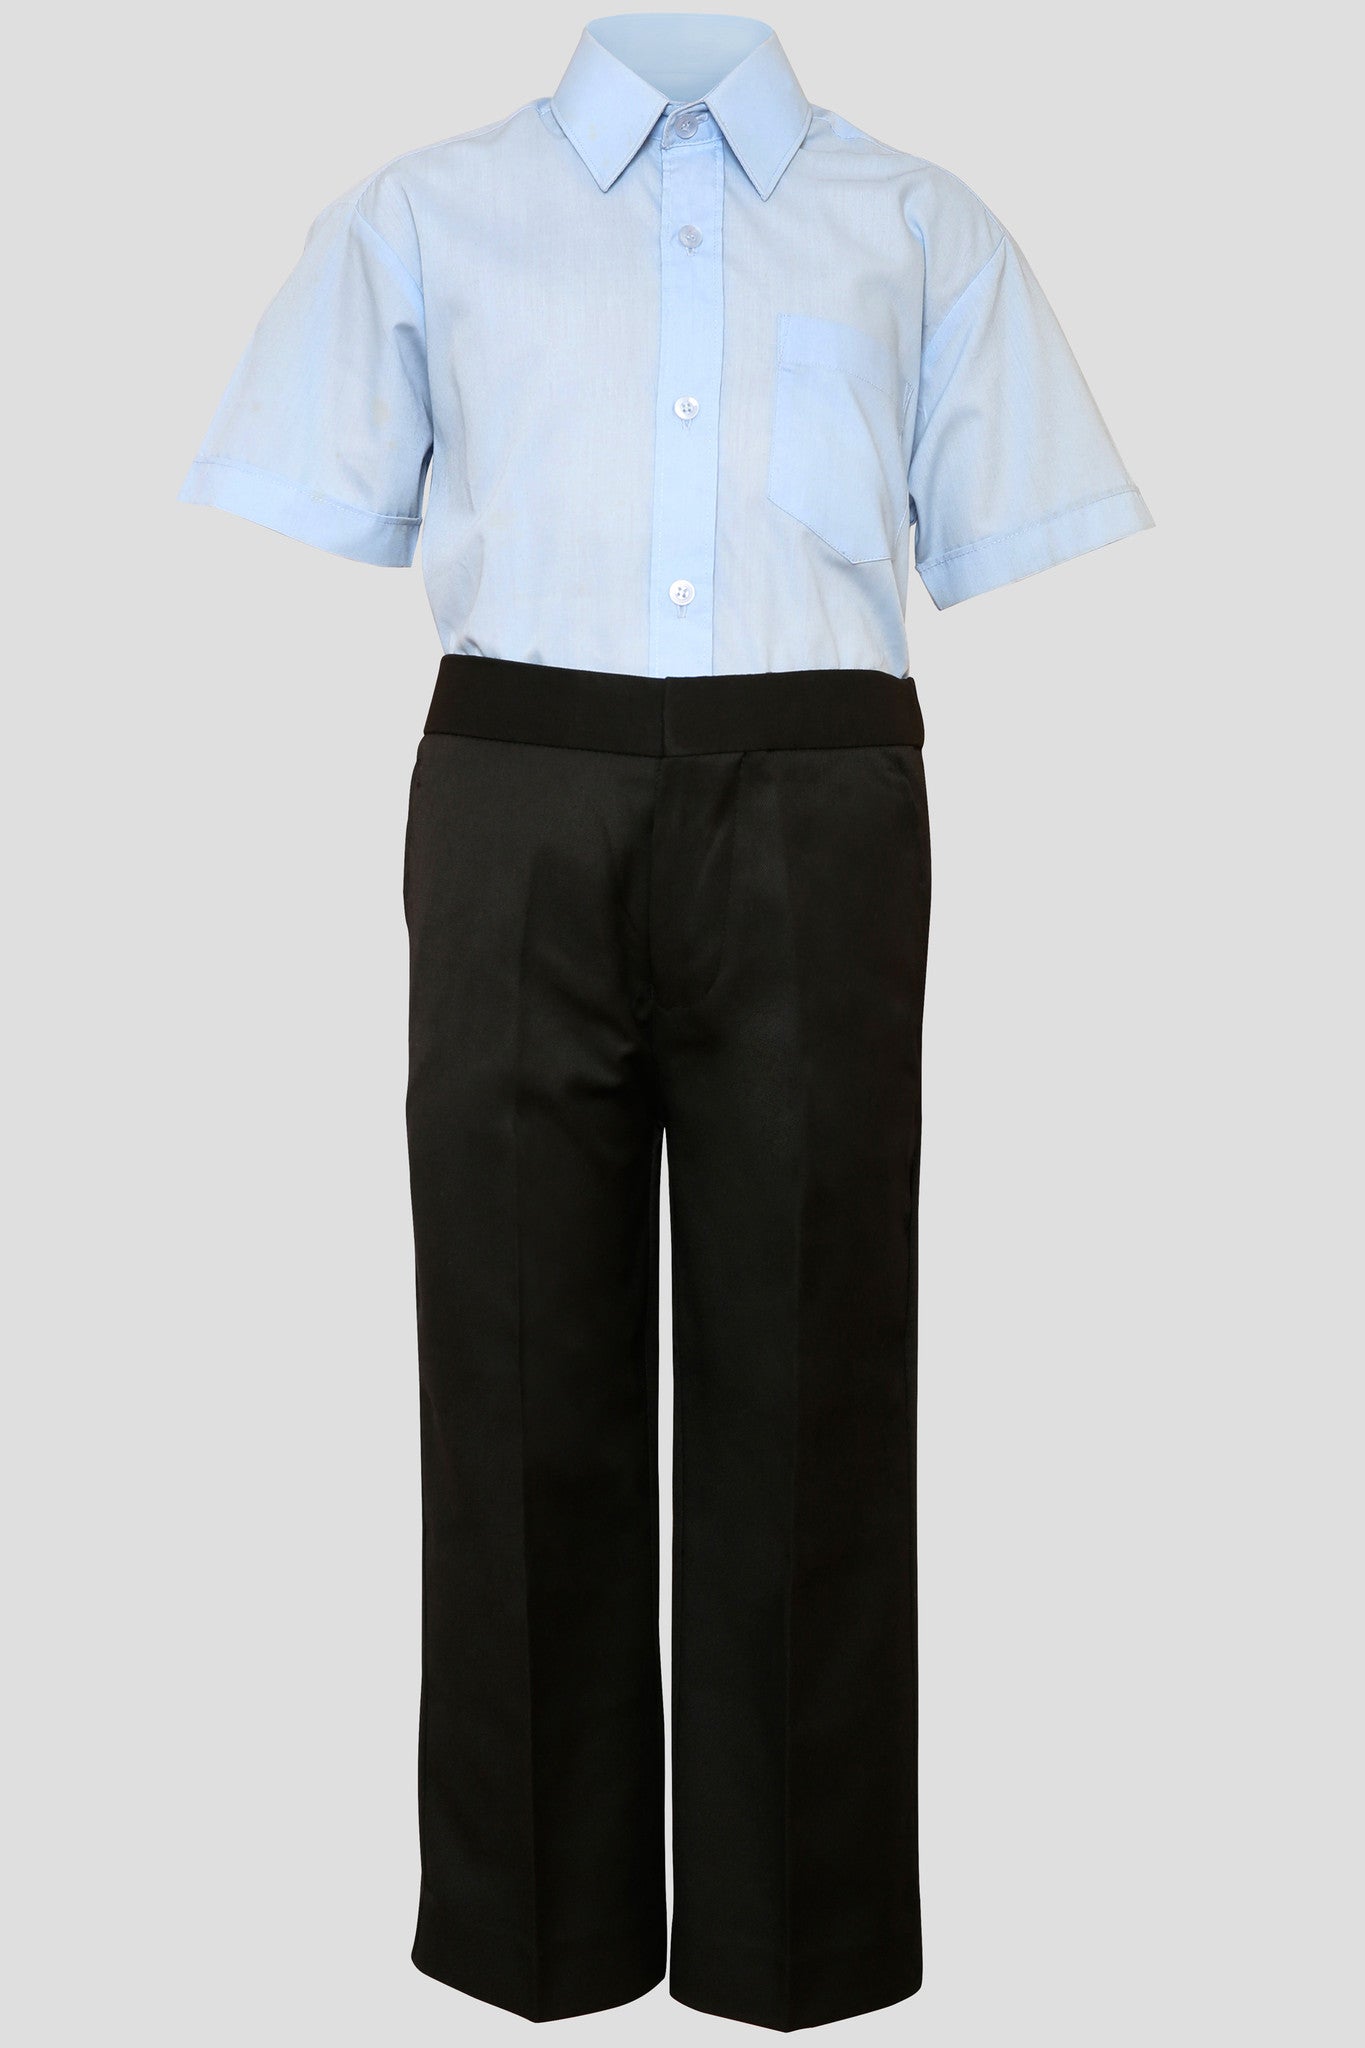 Boys plain front school trousers - Quality school uniforms at the